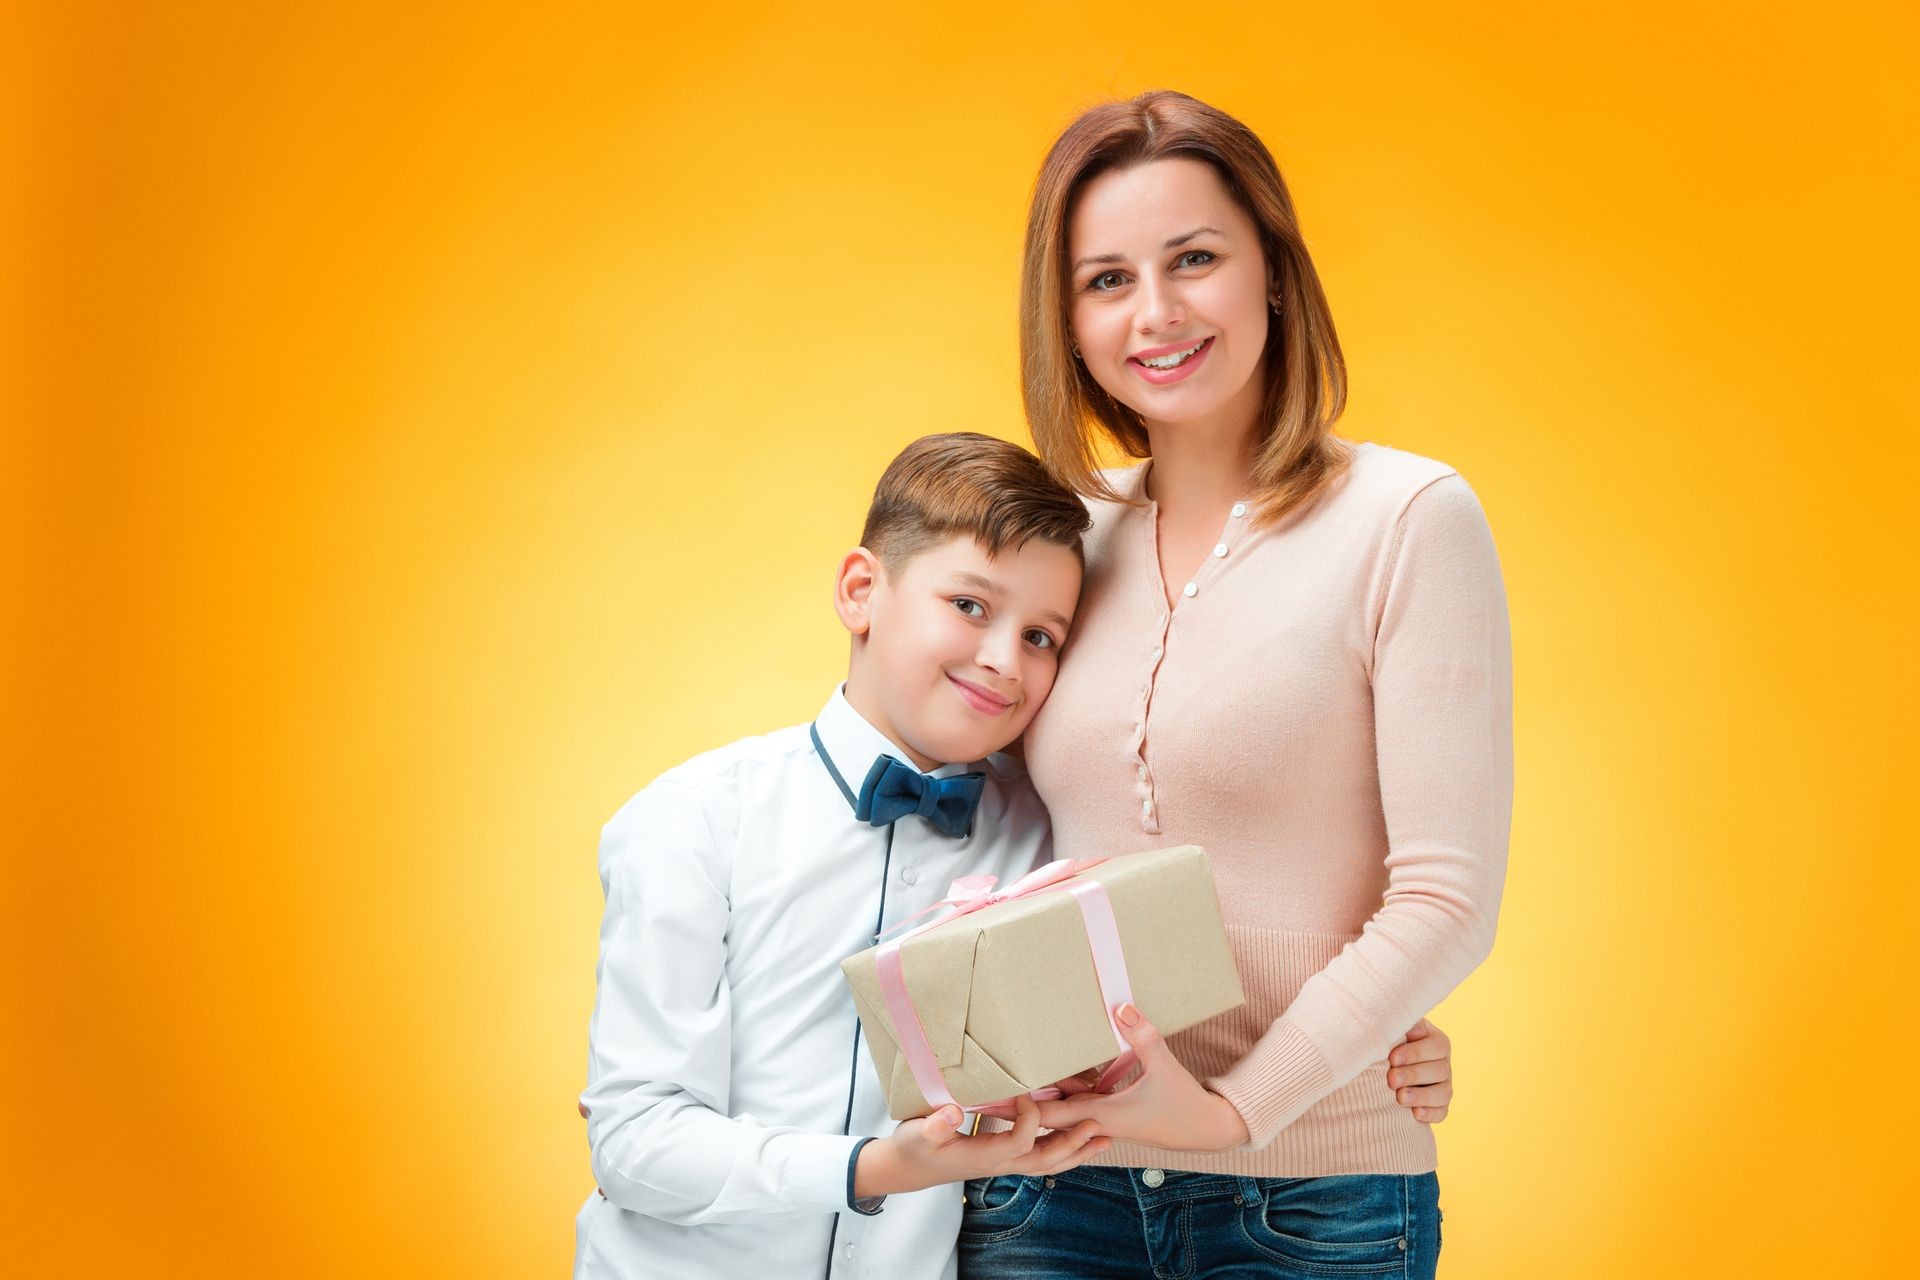 A boy and his mother holding customized gift celebrating Mother's day